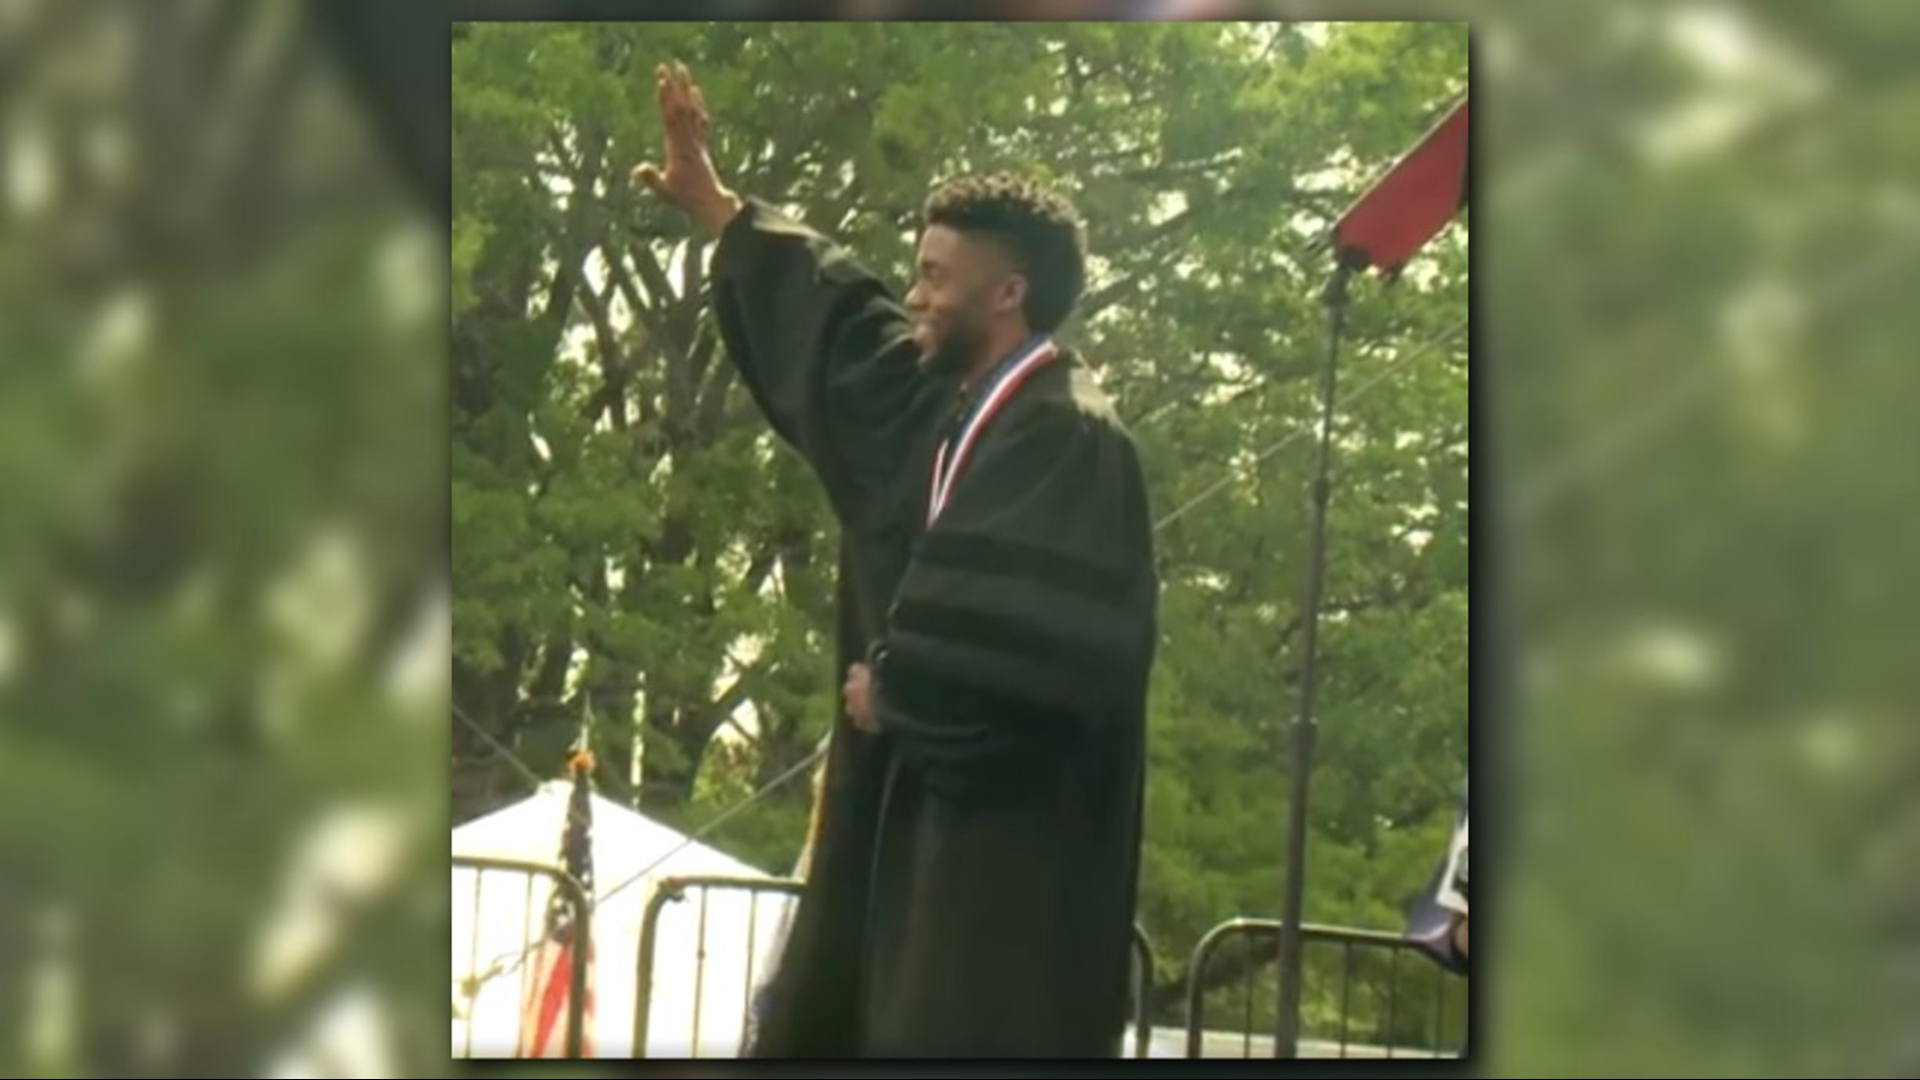 Chadwick Boseman gives 'The Black Panther' salute at @HowardU's commencement. #WakandaForever